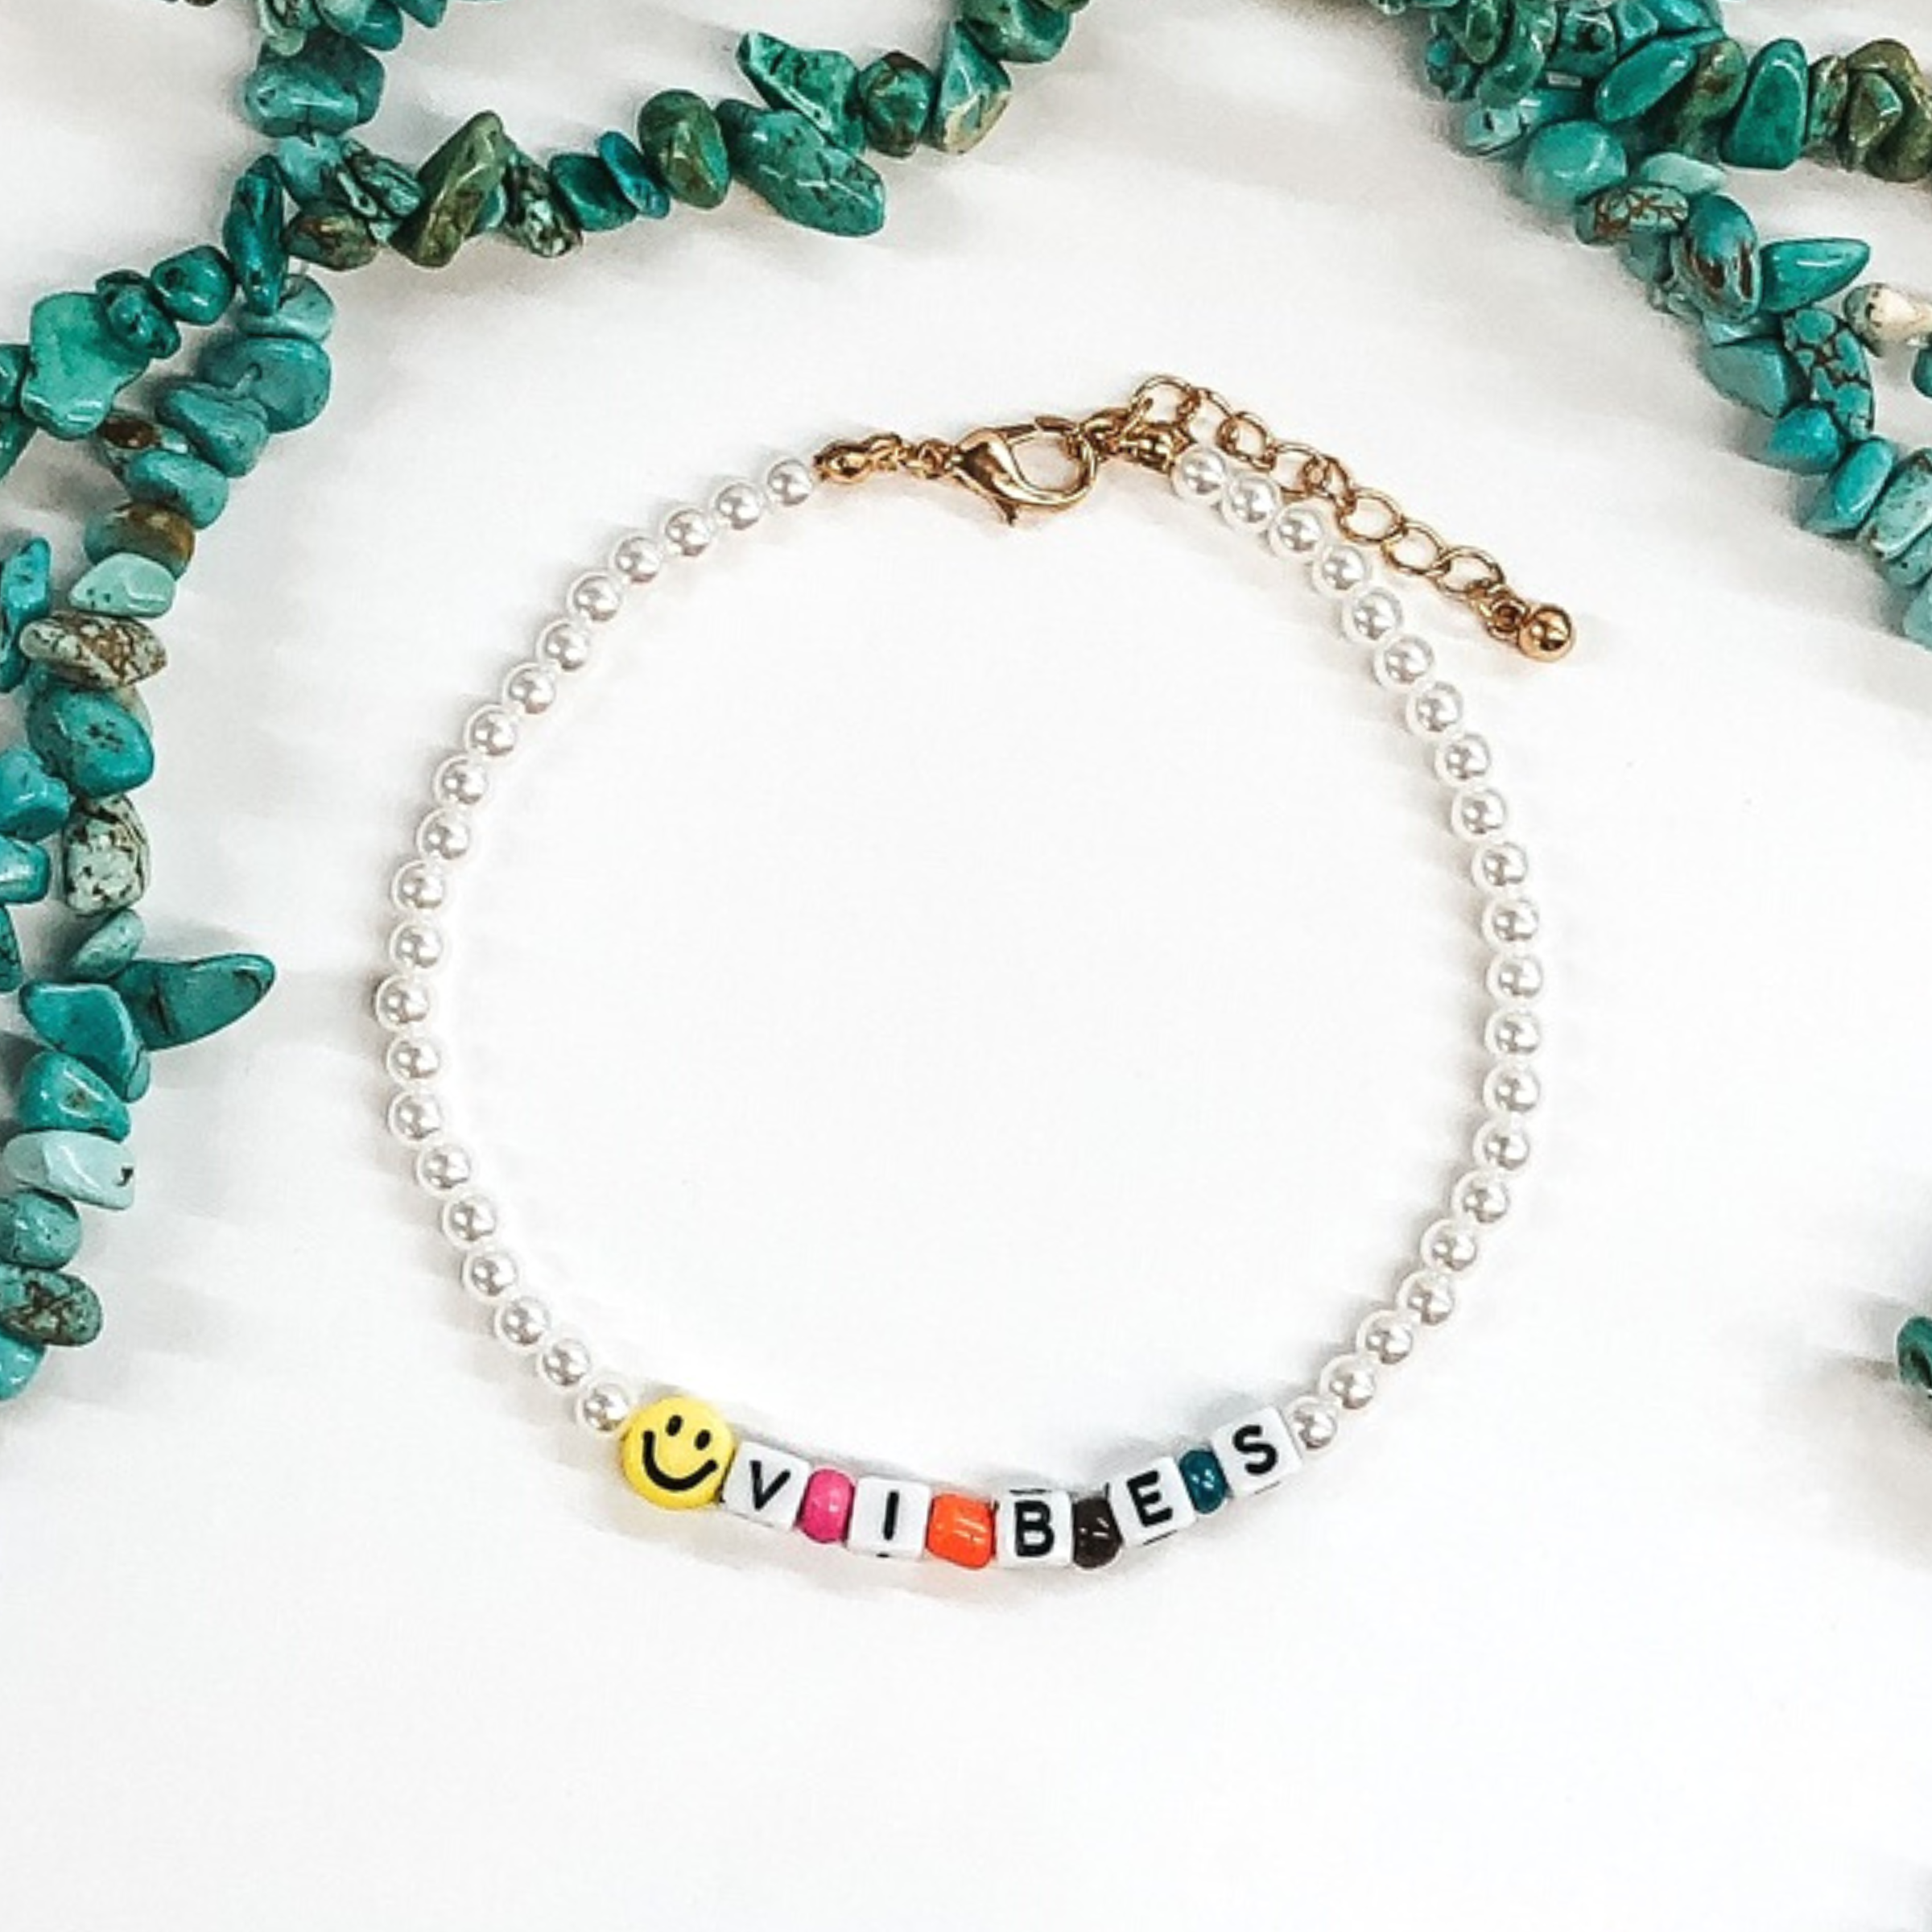 white beaded adjustable anklet with letter beads that say vibes and a smiley face bead